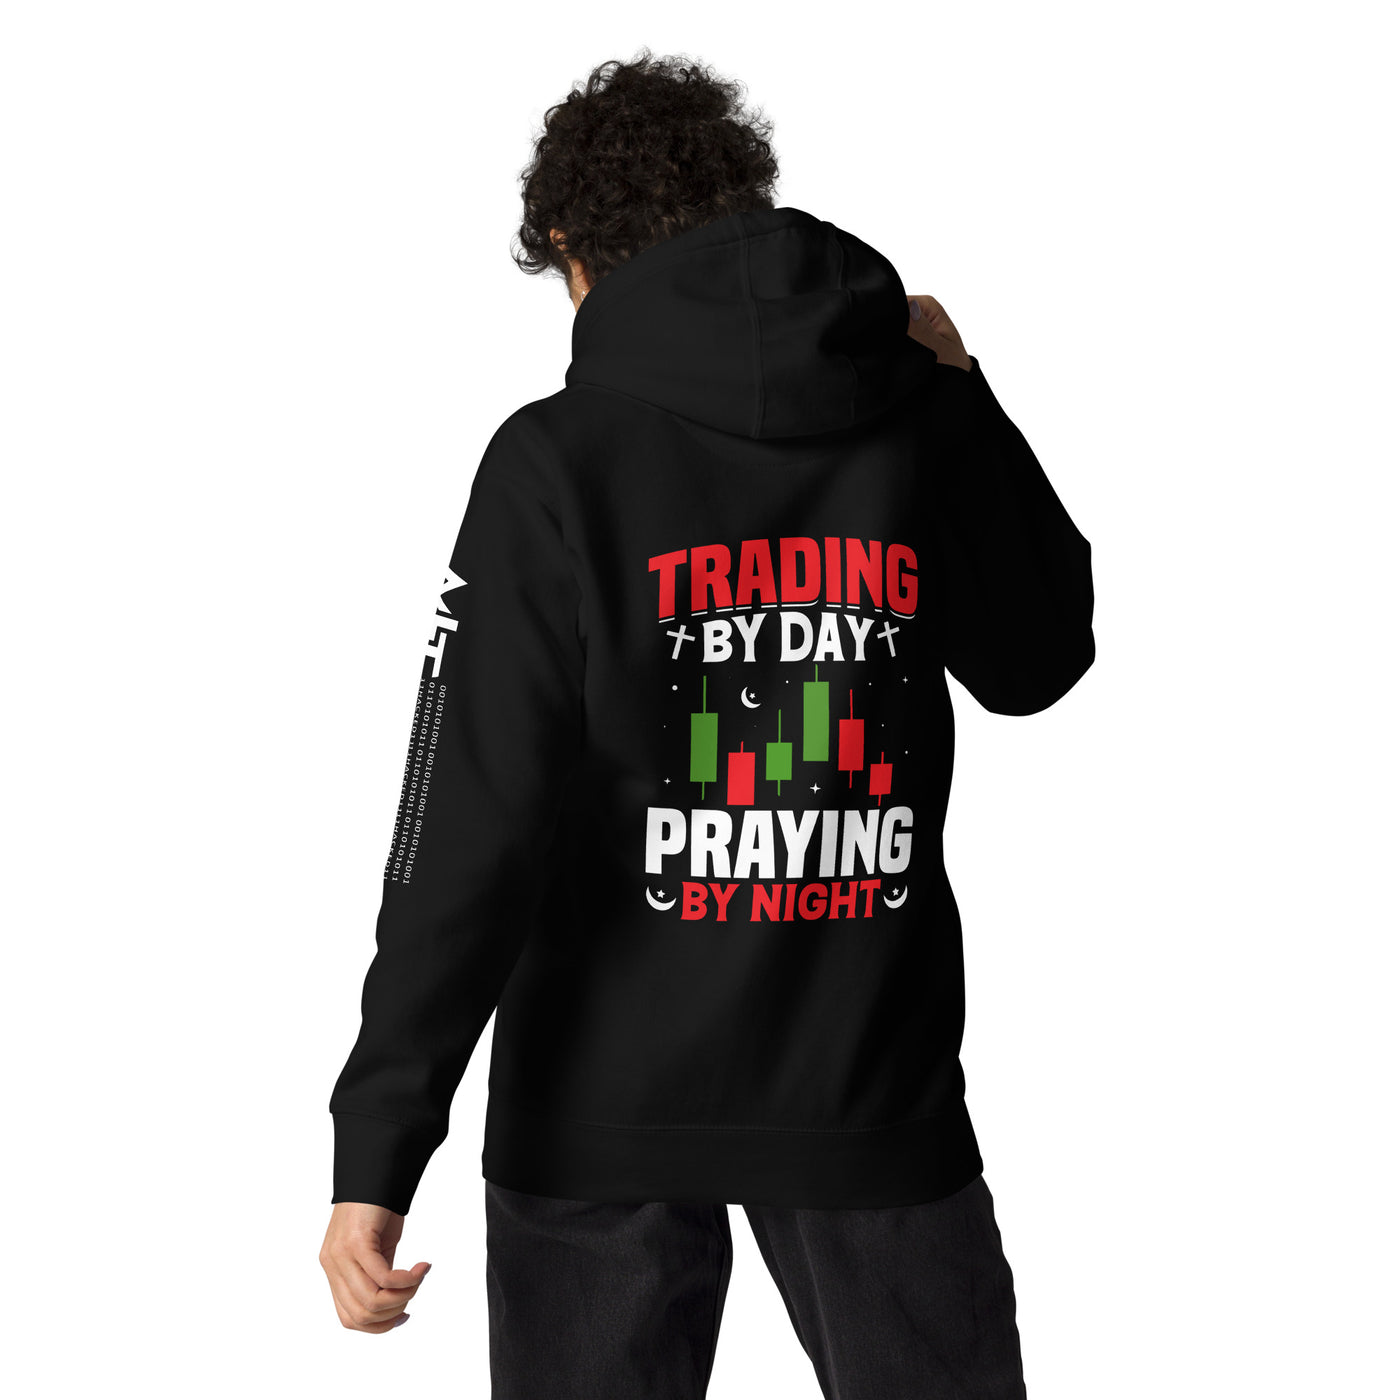 Trading by Day Praying by Night - Unisex Hoodie ( Back Print )